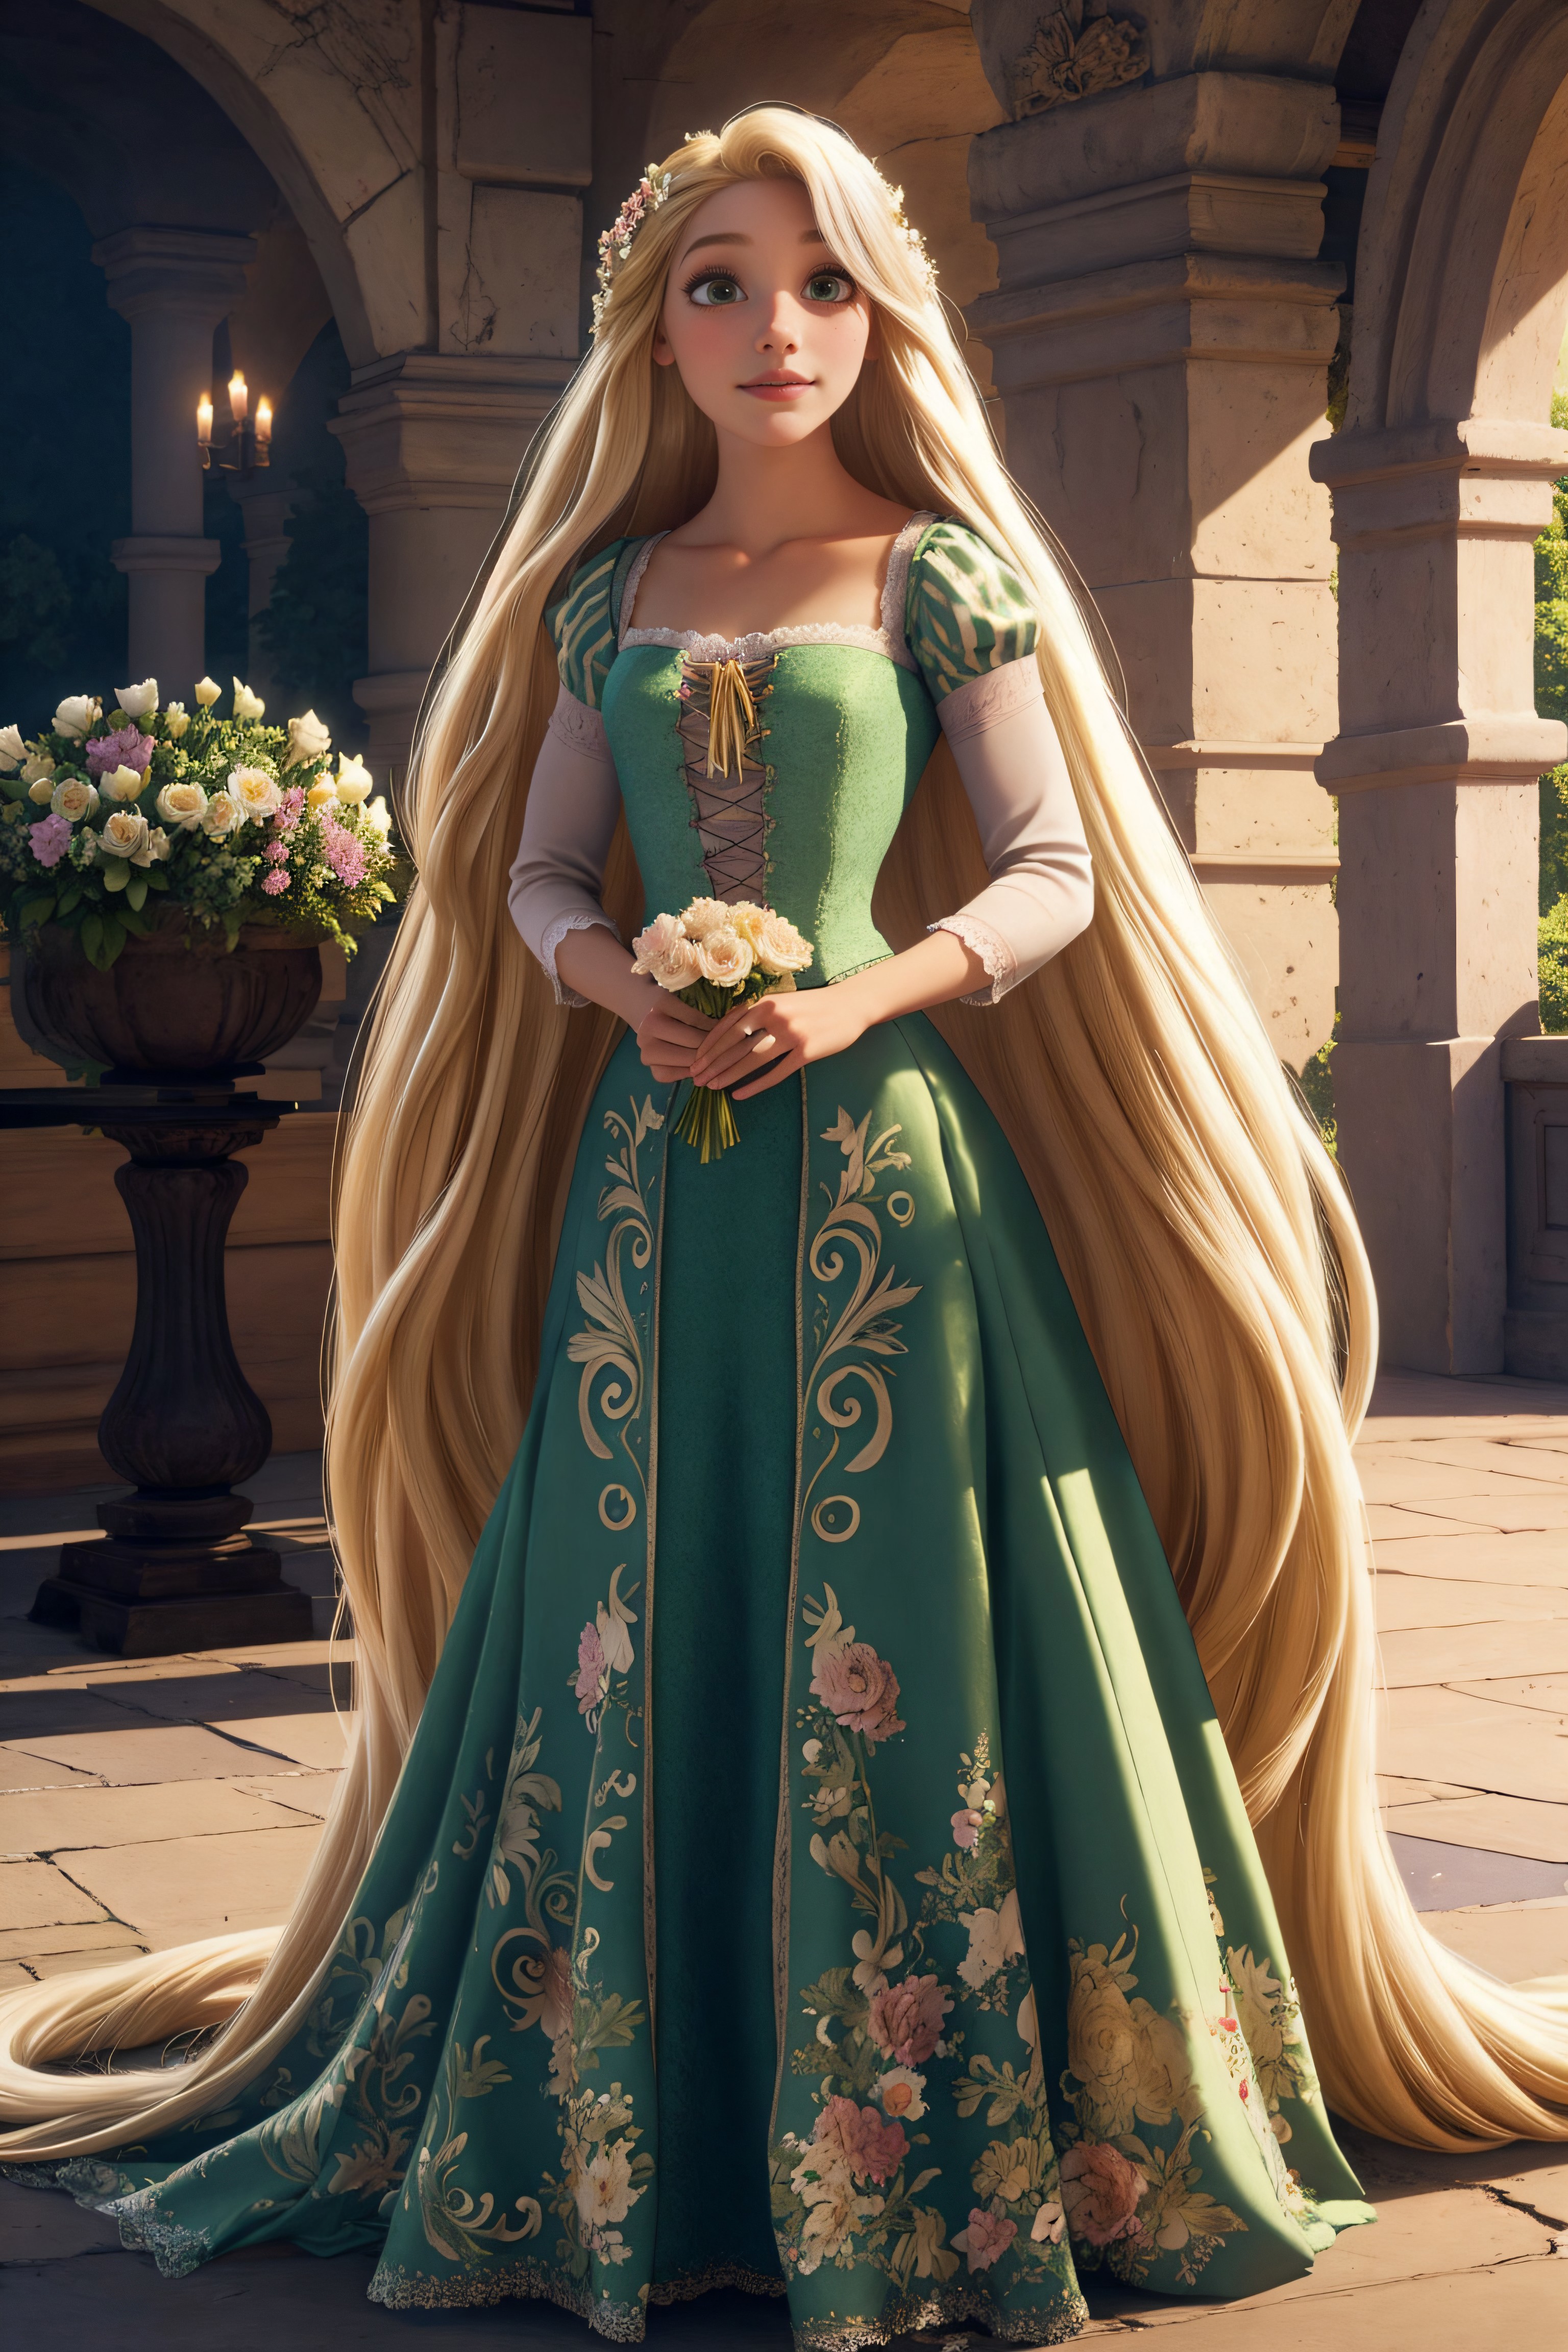 A beautifully illustrated princess with long blonde hair wearing a green dress and holding a rose.